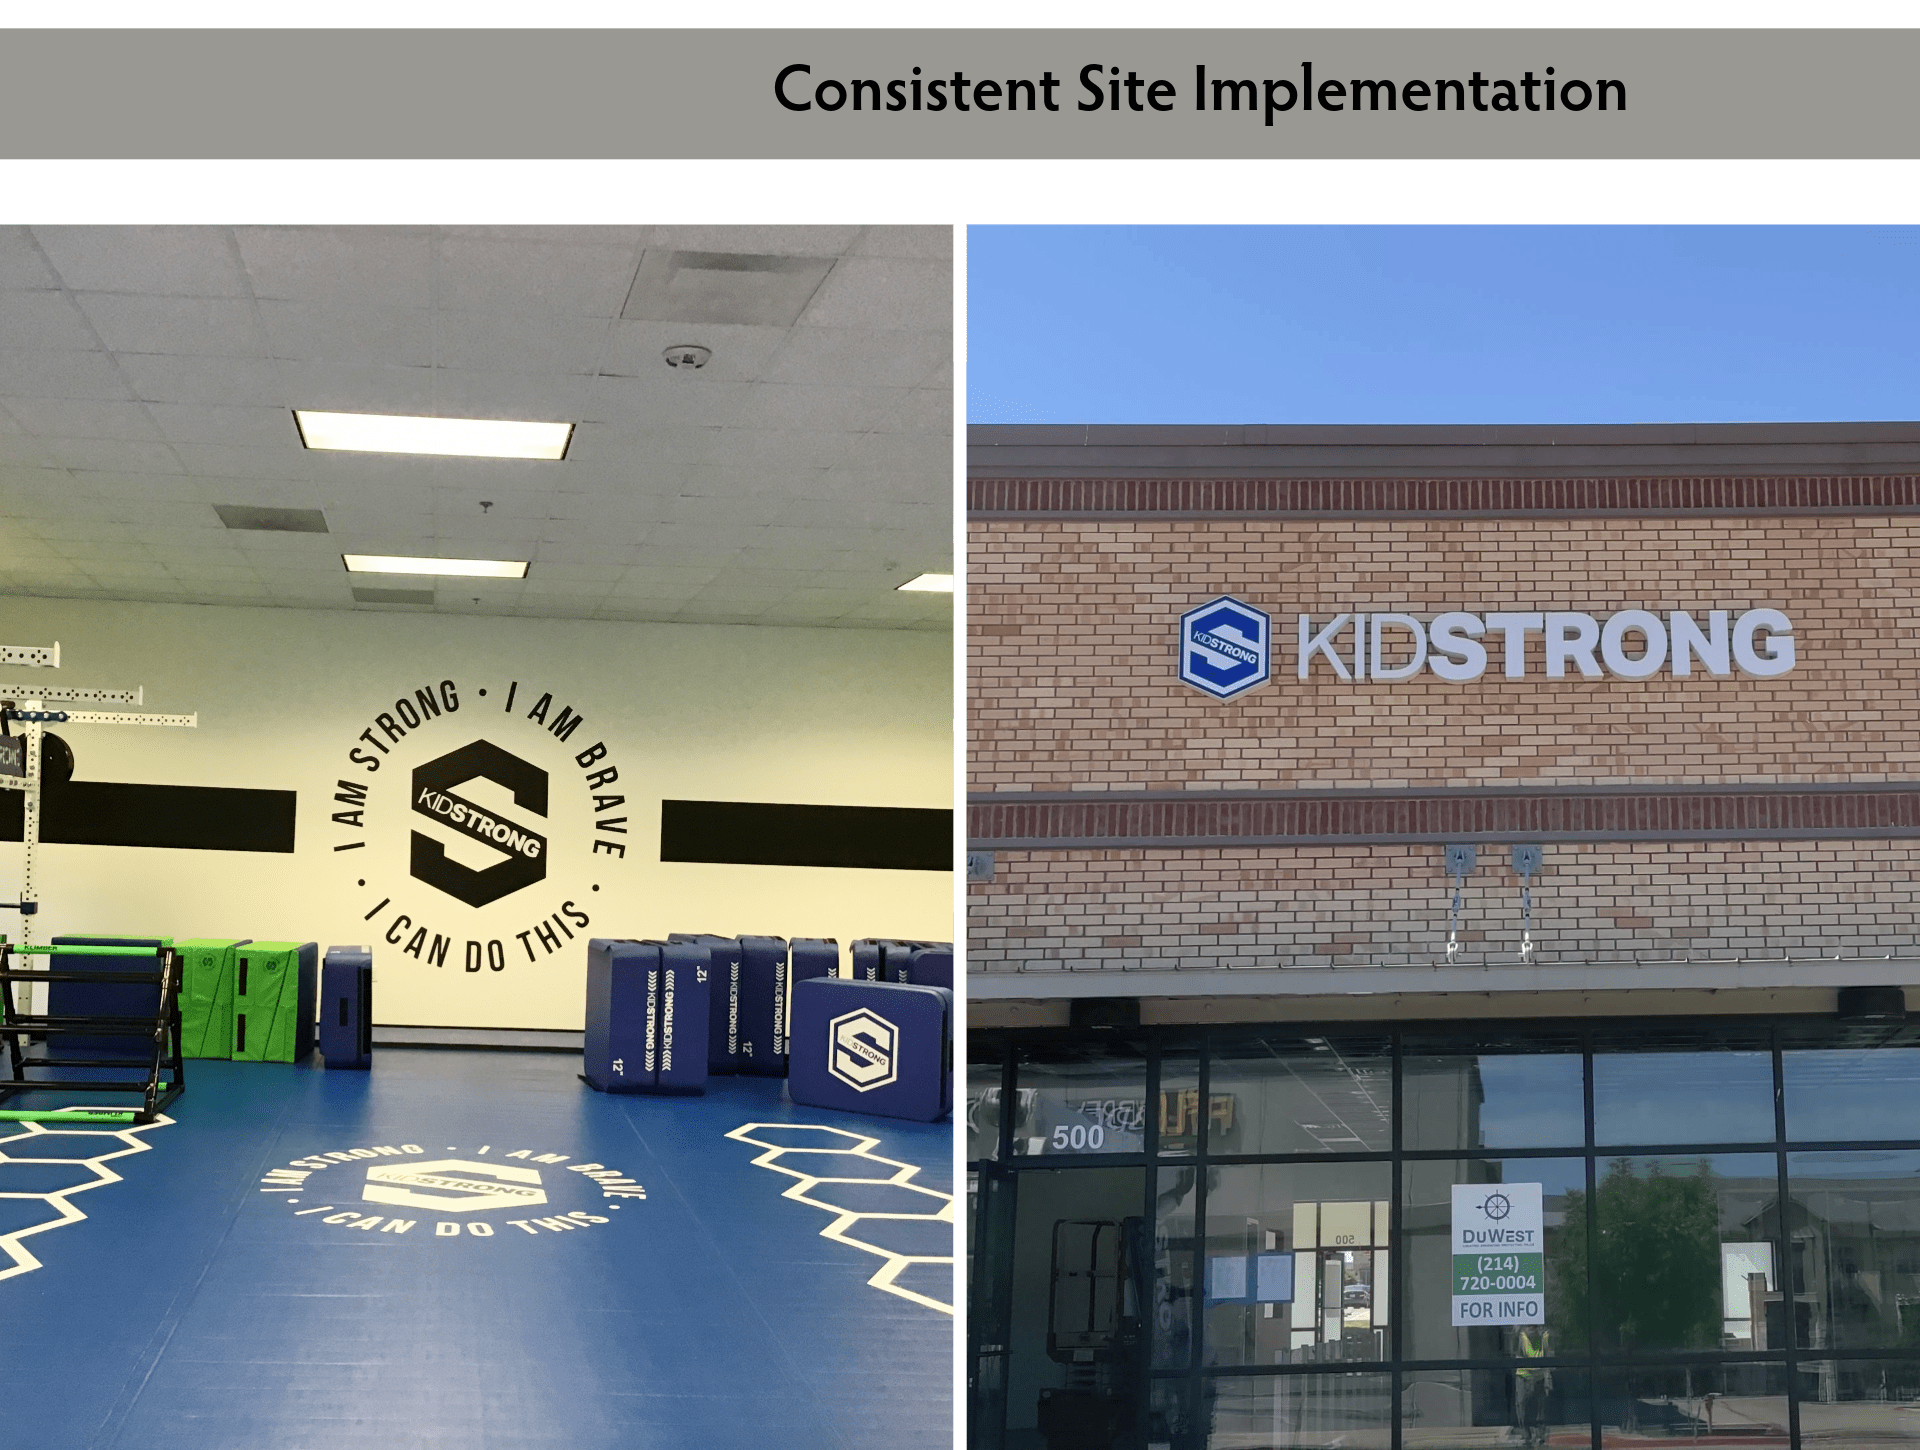 Completed Interior Exterior Signage for Consistent Sign Implementation